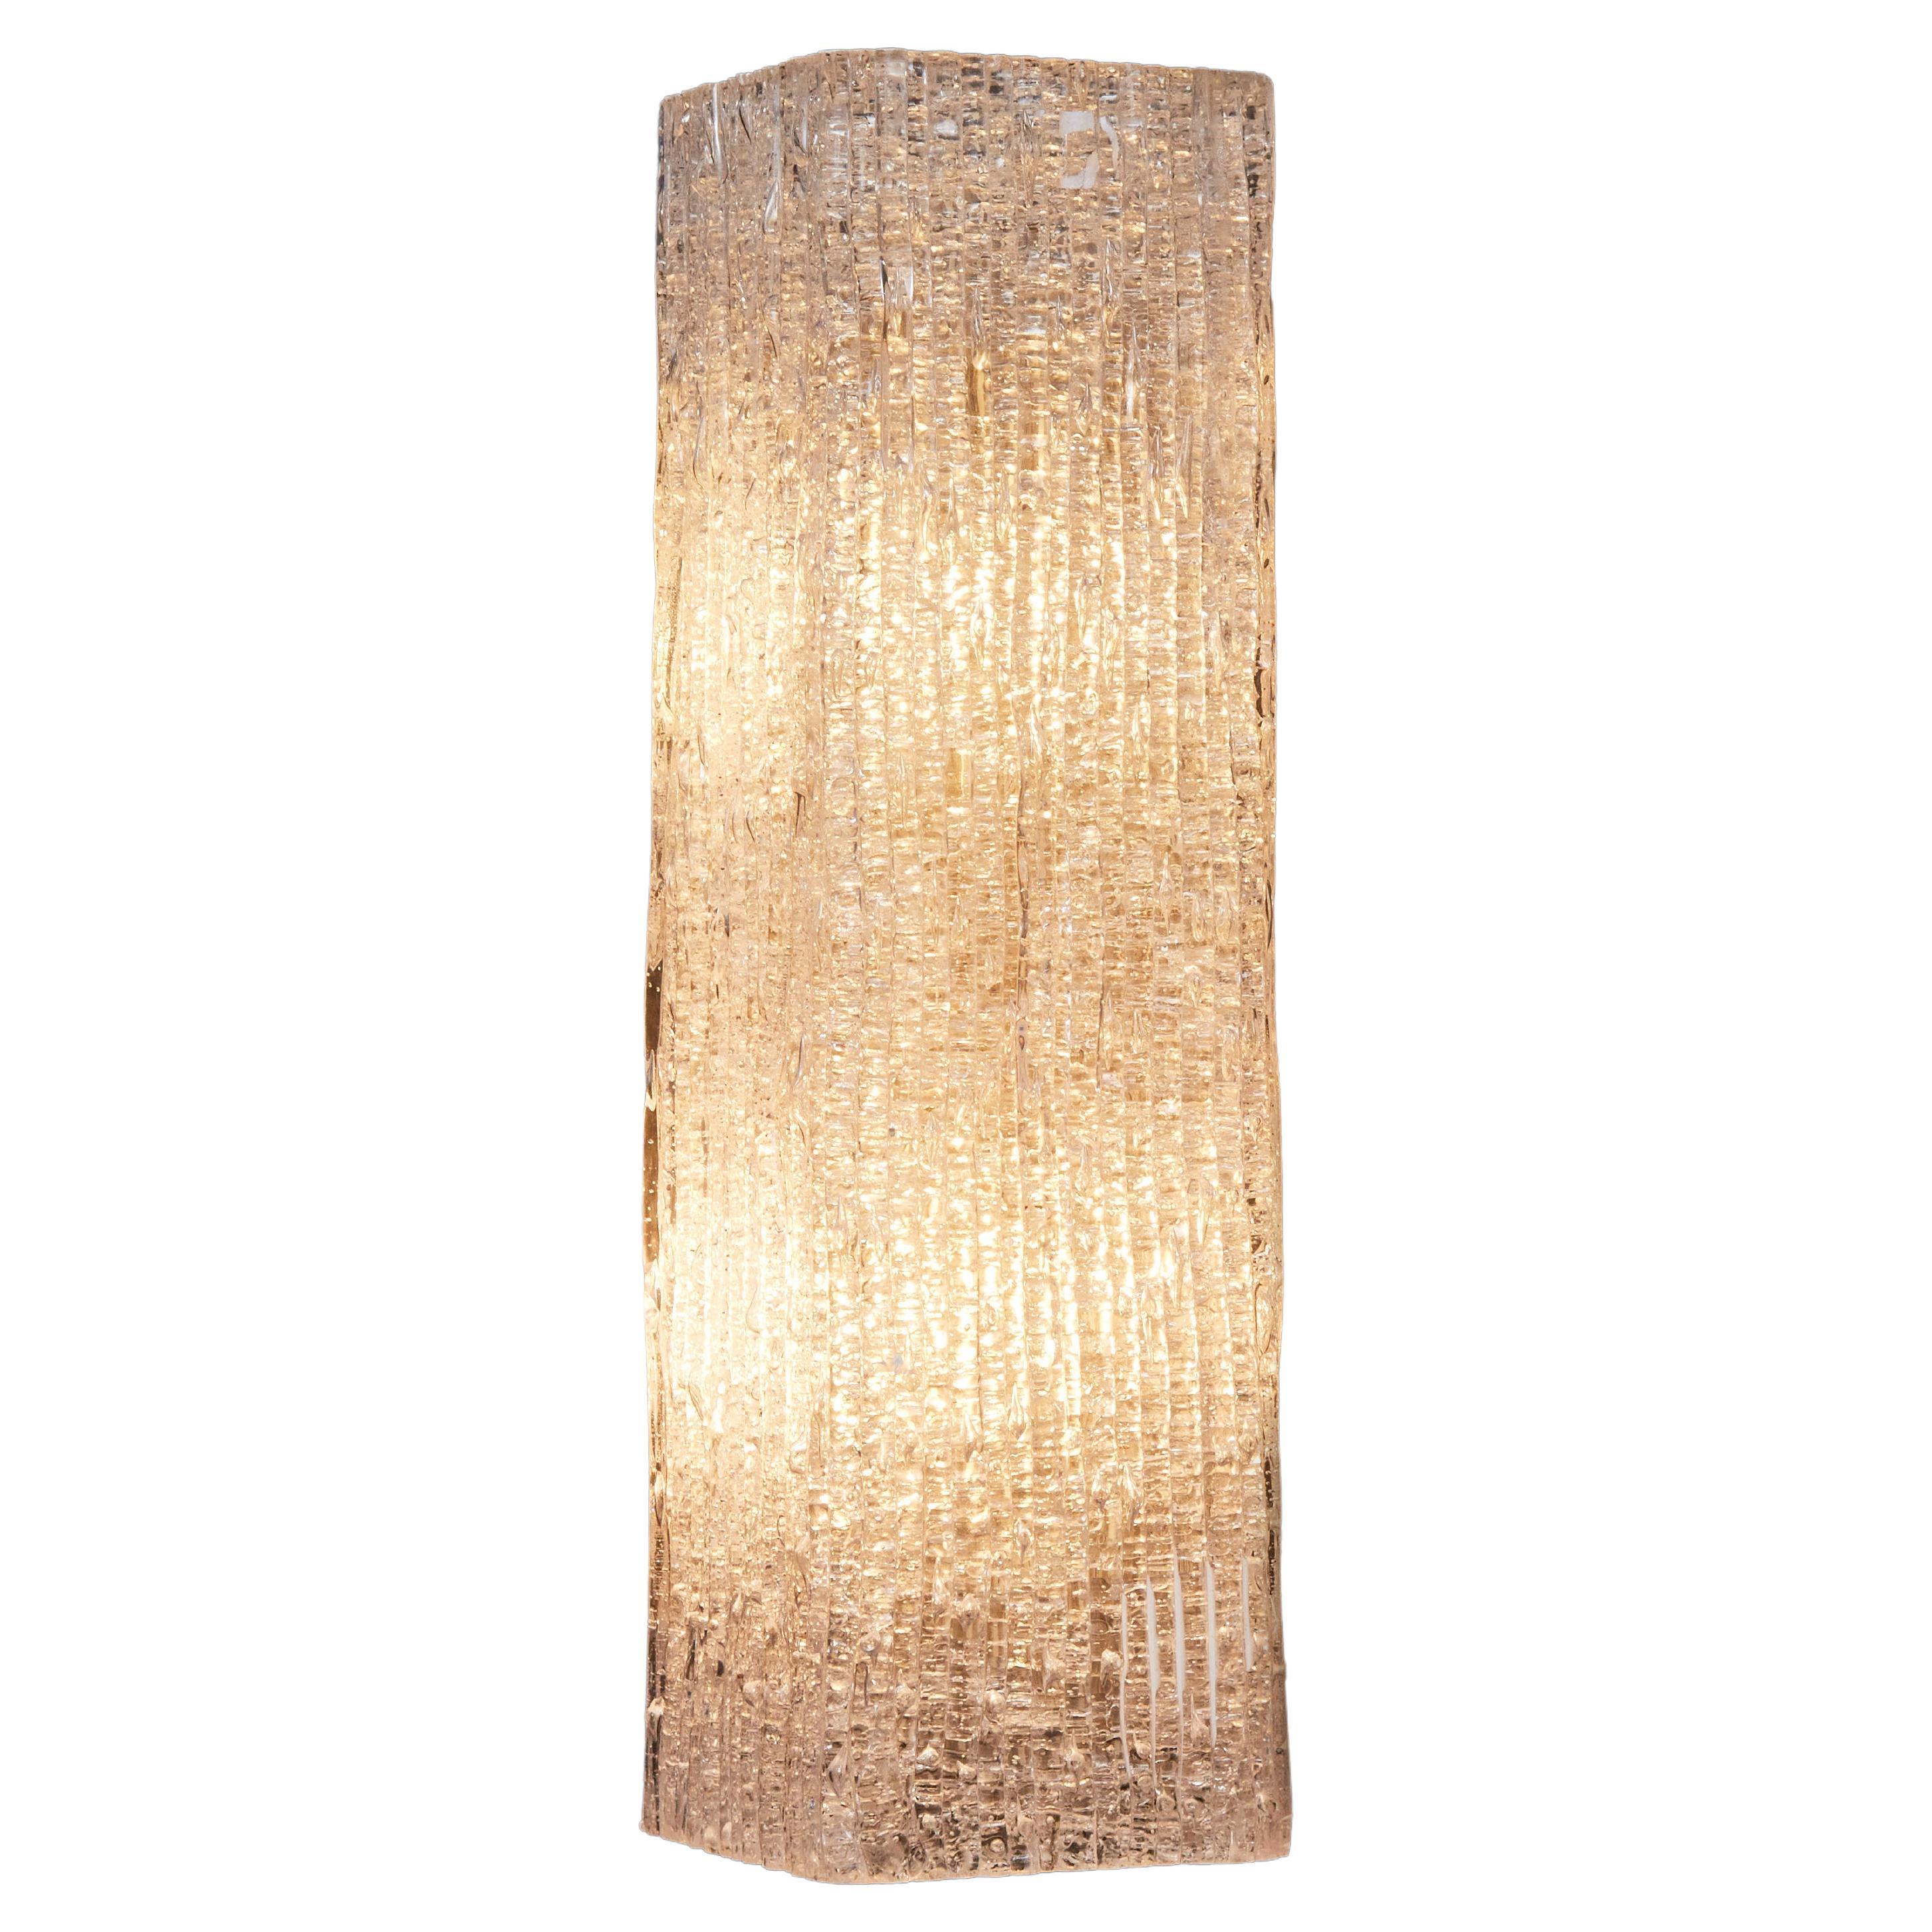 Pair of Textured Plexi Wall Sconces